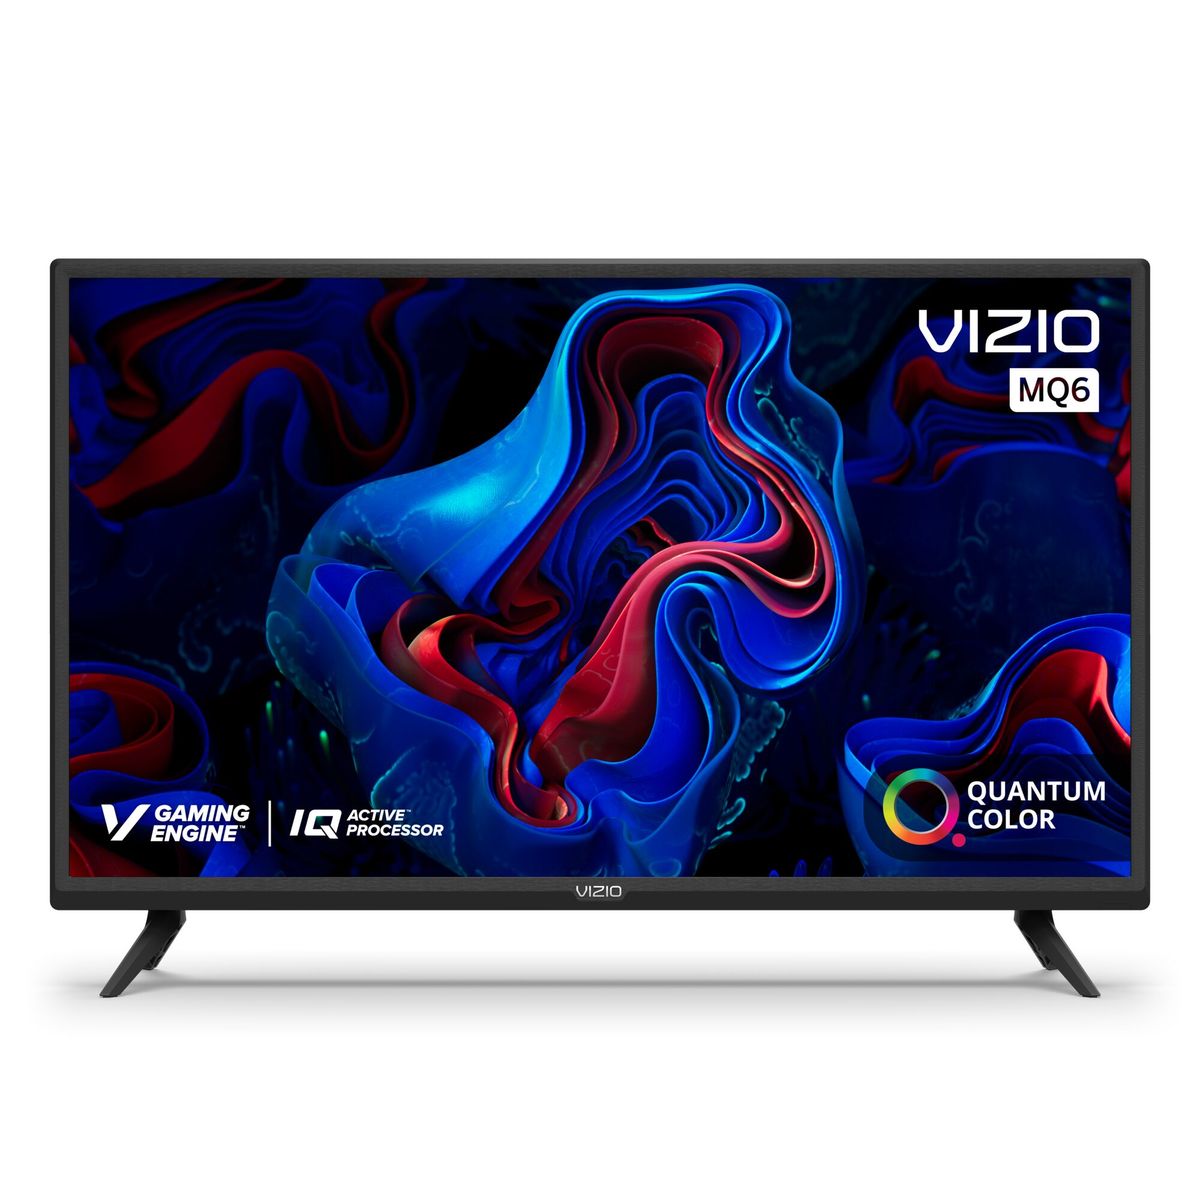 Black Friday Tv Deal This Tcl 50 Inch 4k Tv Drops To 229 99 At Best Buy Techradar